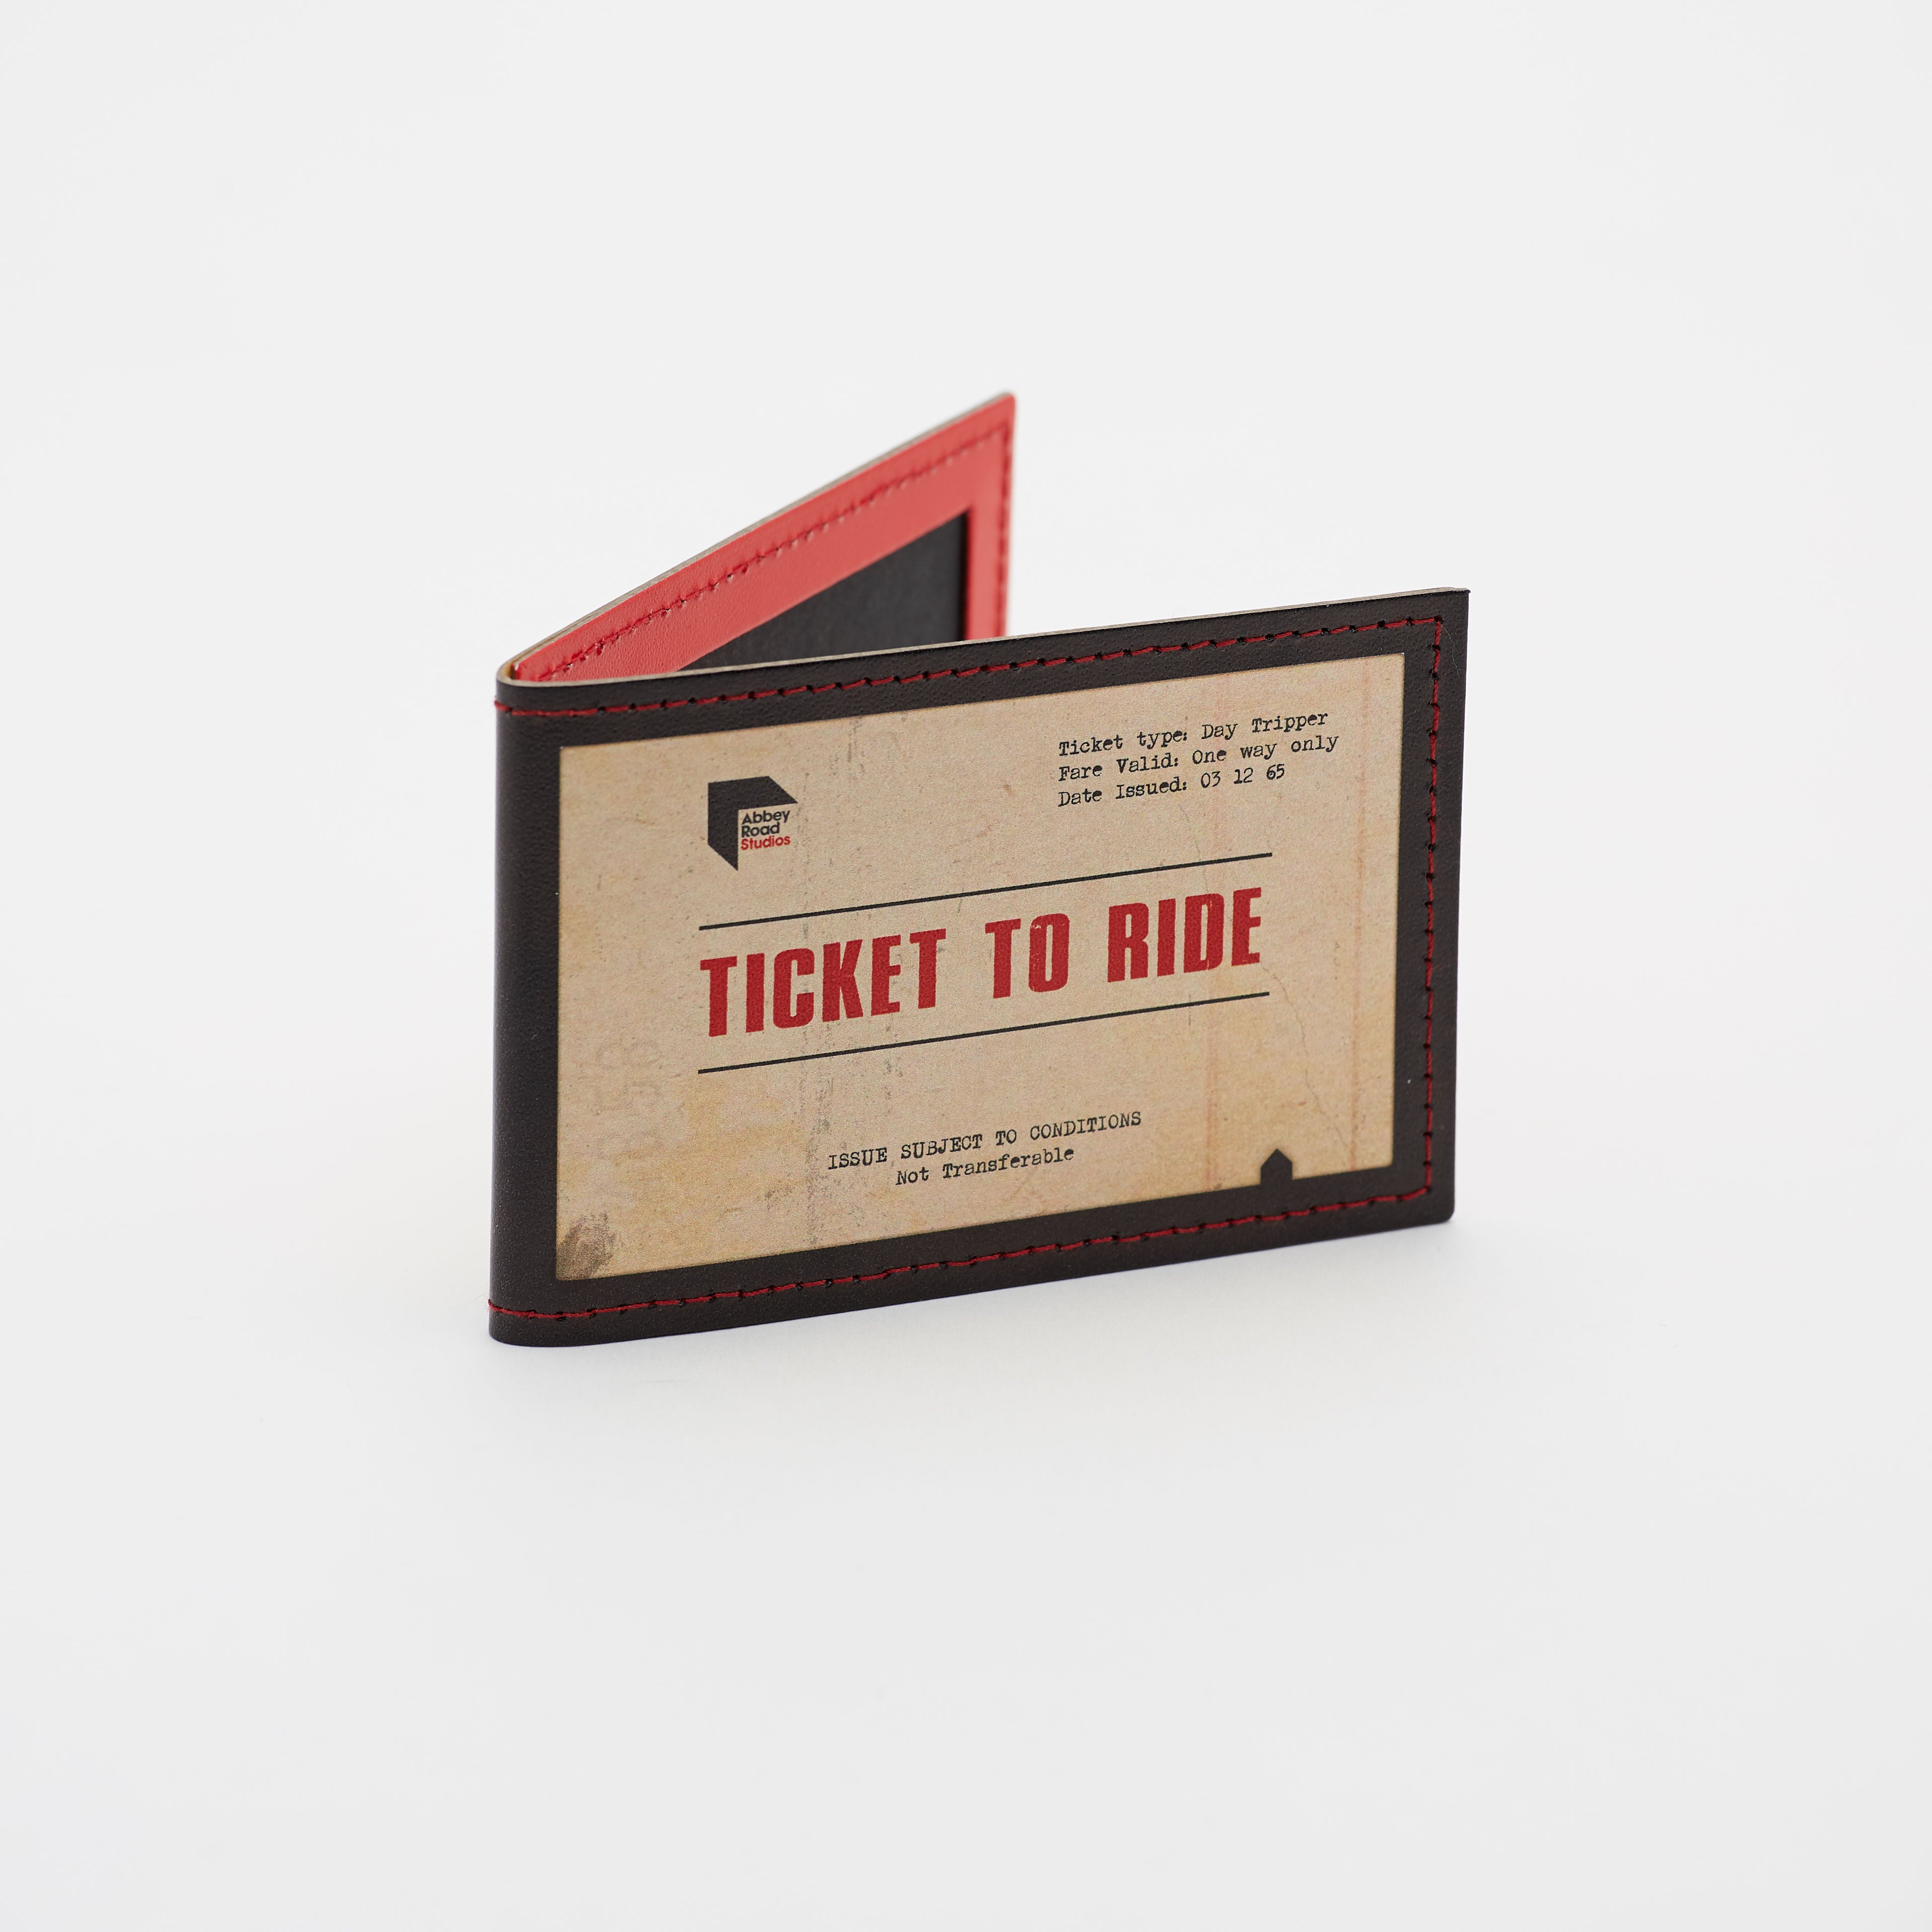 Abbey Road Studios - Leather Card Holder - Ticket To Ride